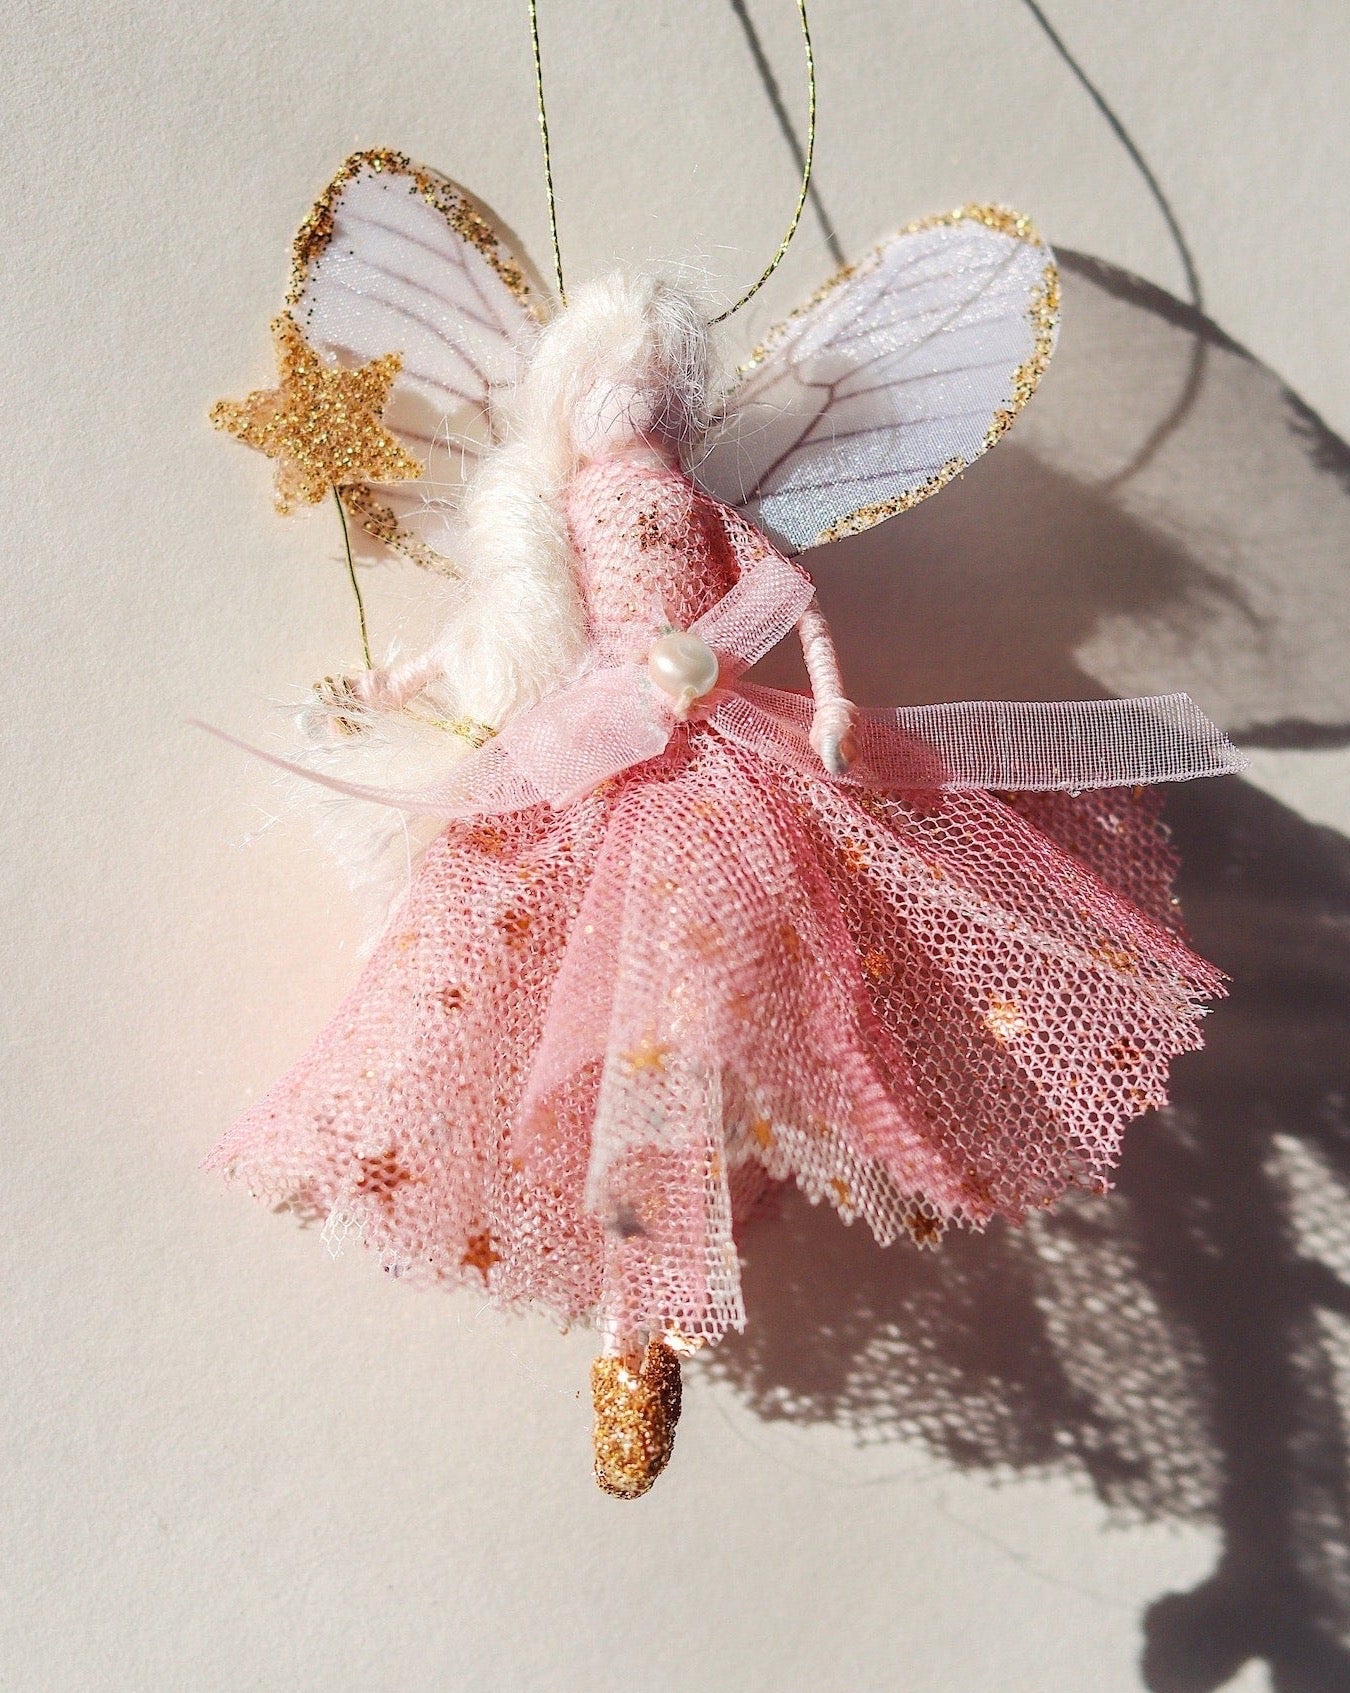 Each Florialice fairy is lovingly created using cotton, silks, tulle, delicate embellishments, and a magic wand... Every fairy will slightly differ, which gives them their unique character. Their wings are made from the Silk Organza, which really does make the fairies come to life!